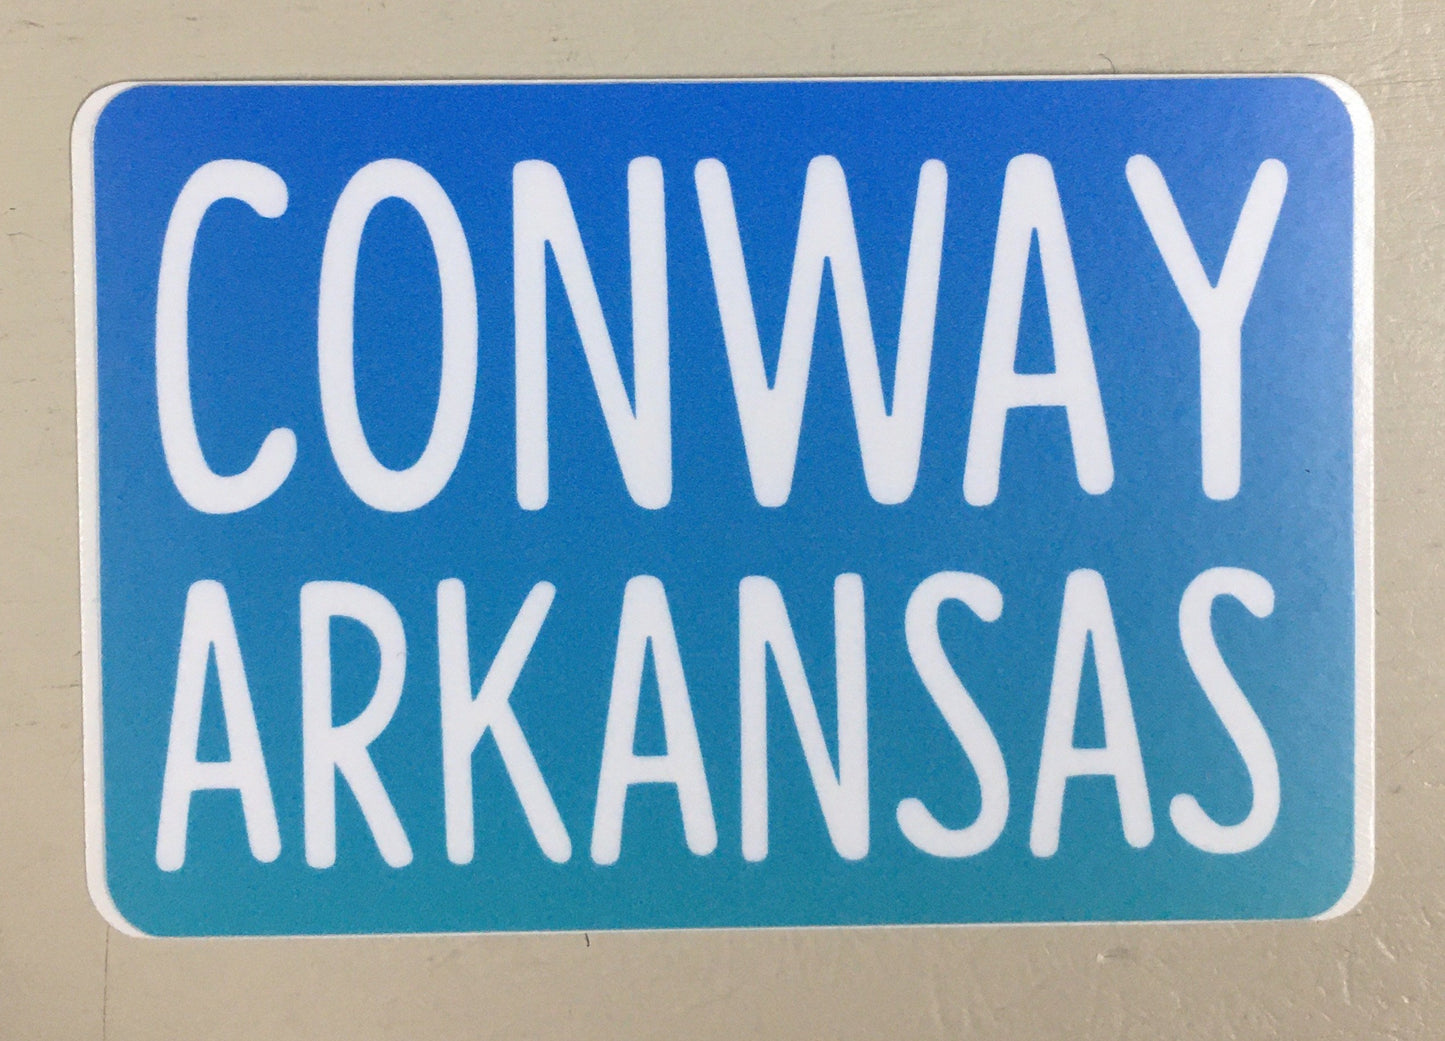 sticker on white background. sticker has blue background "conway arkansas" in white capital letters.